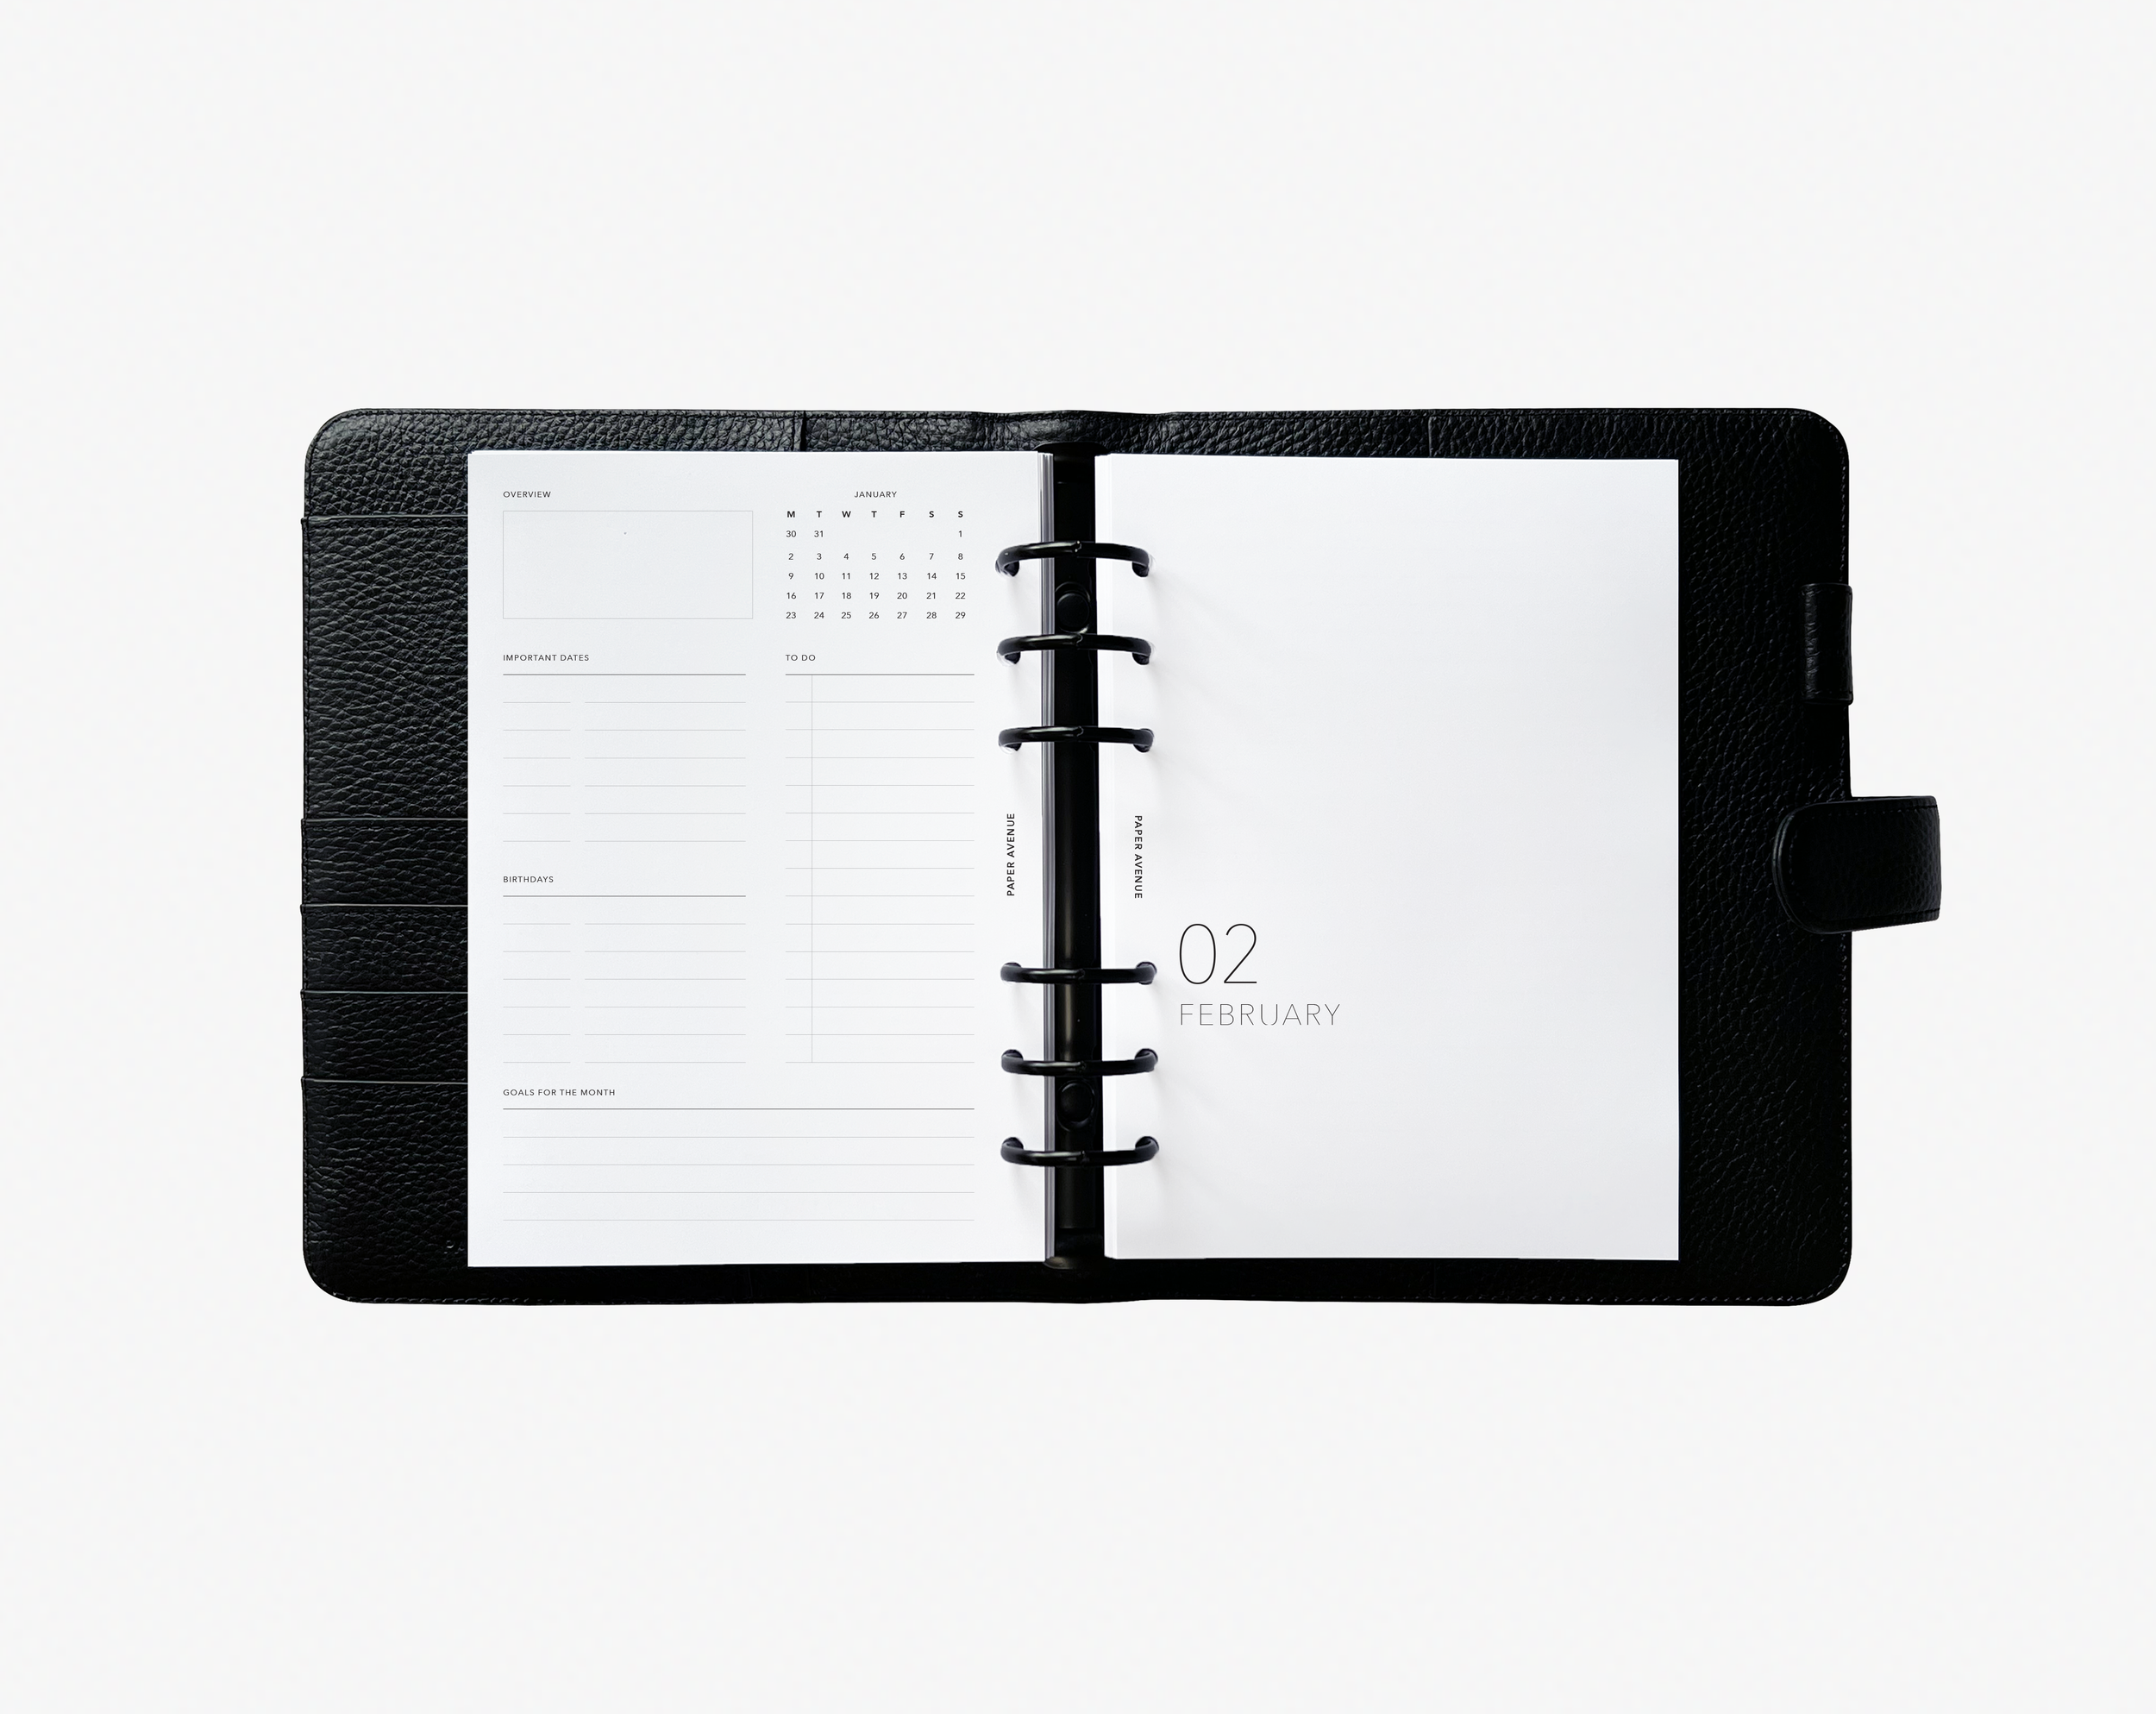 Planner - Monthly Plan DP 23 (2).png